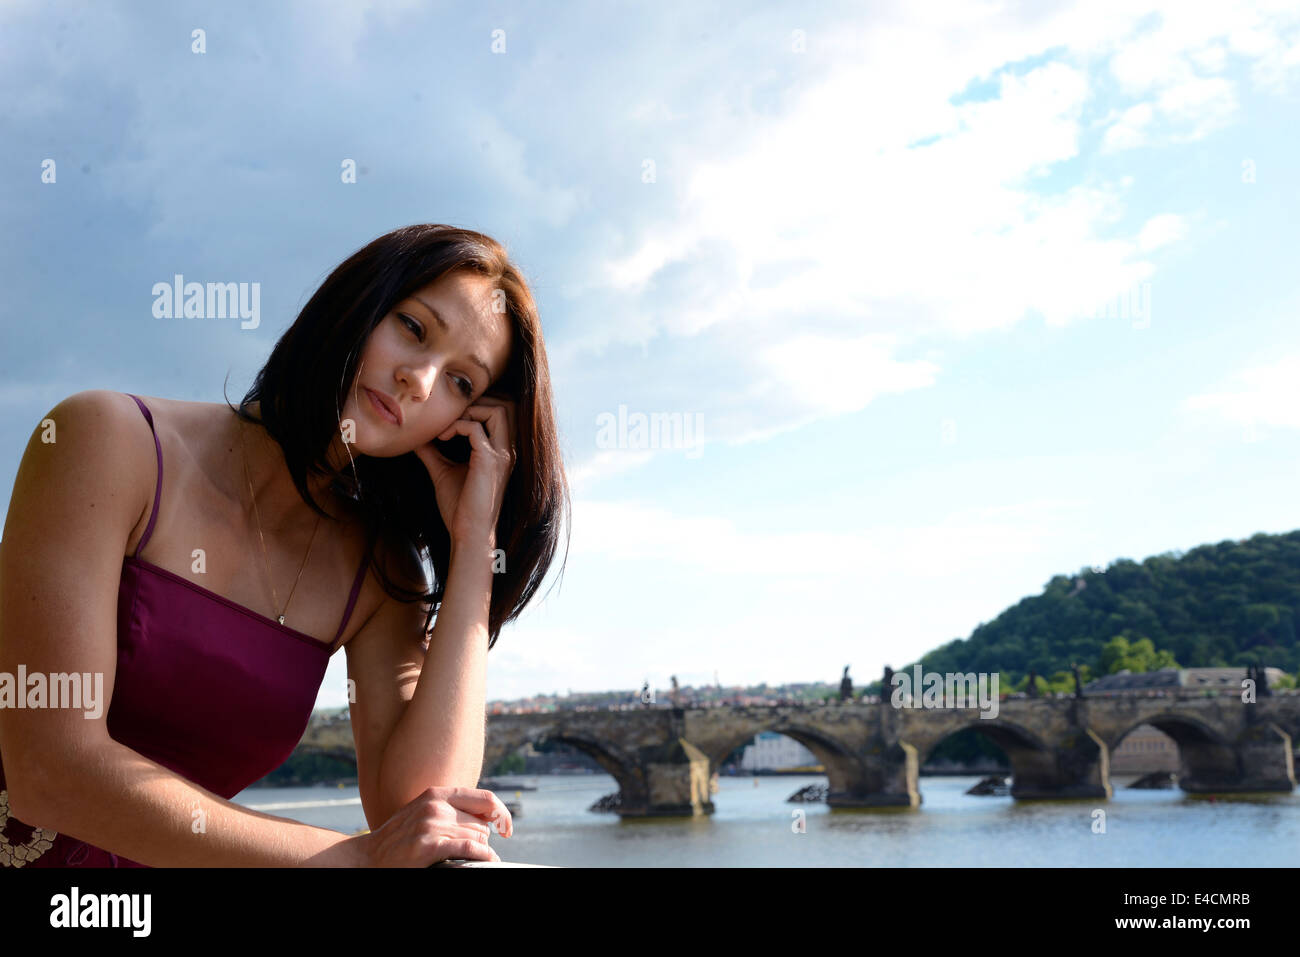 Attractive lady thinking with concern in front of a scenic bridge, river, mountain and sky Stock Photo